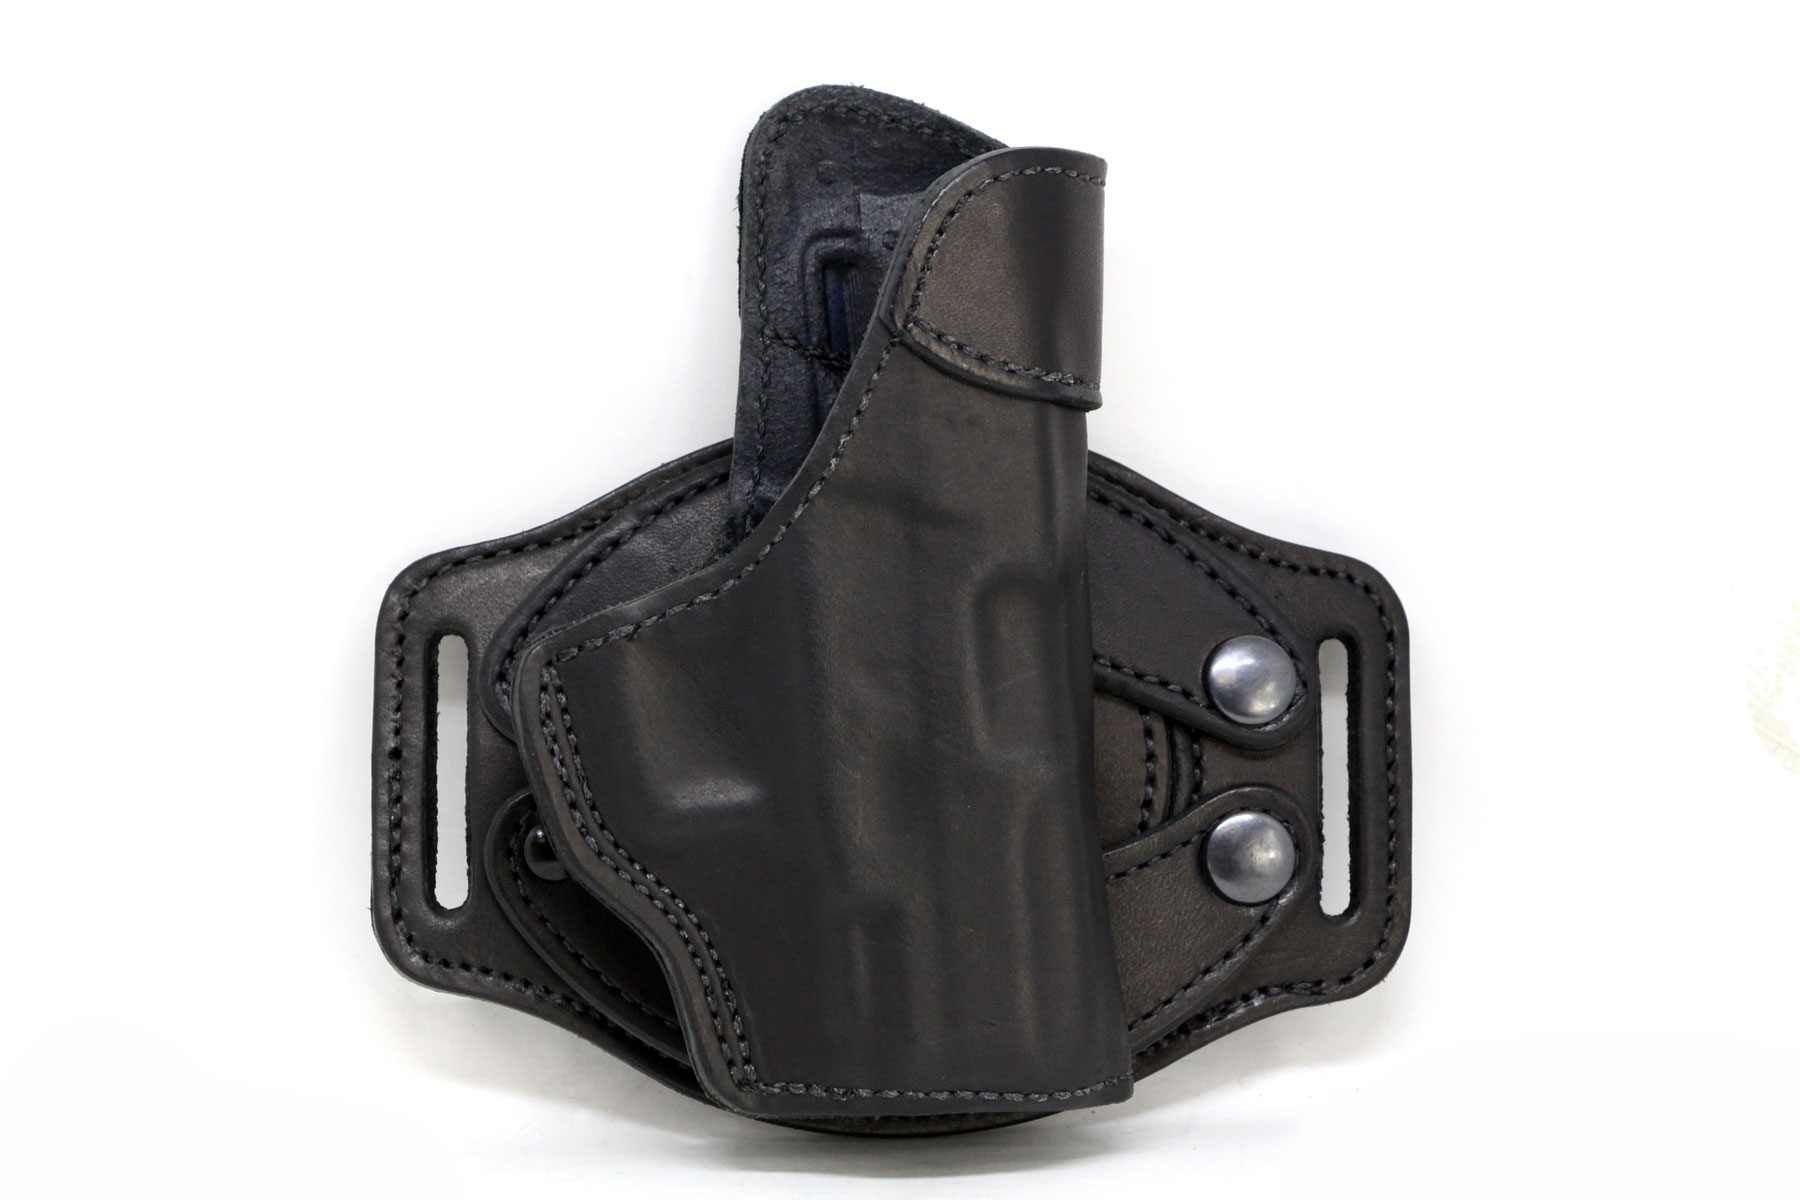 Details about   Small of Back Leather Gun Holster LH RH For Colt Series 70 